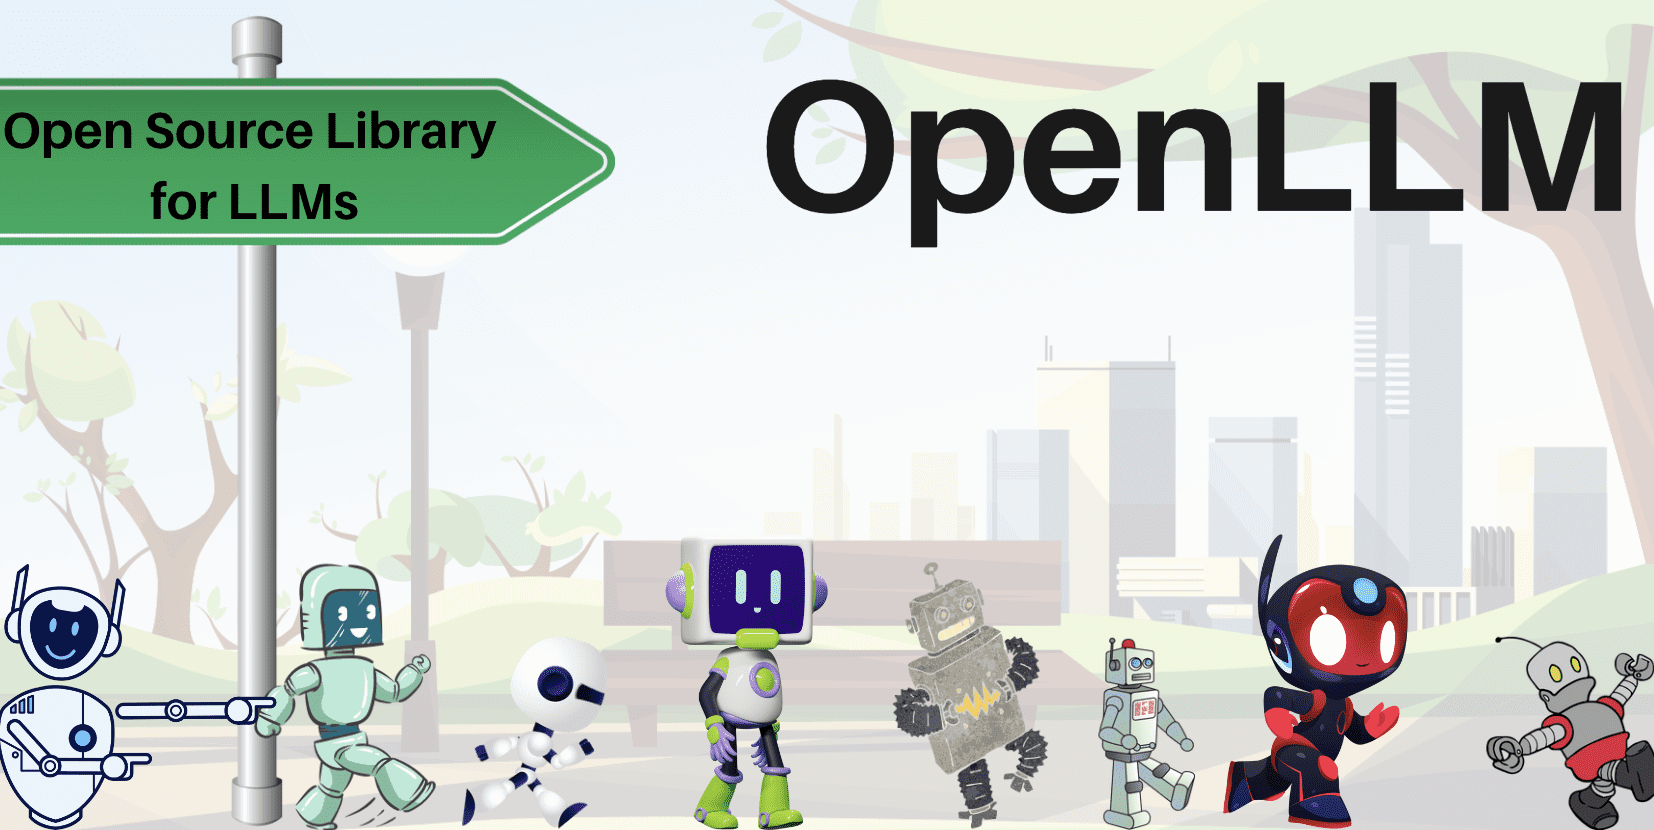 Introducing OpenLLM: Open Source Library for LLMs